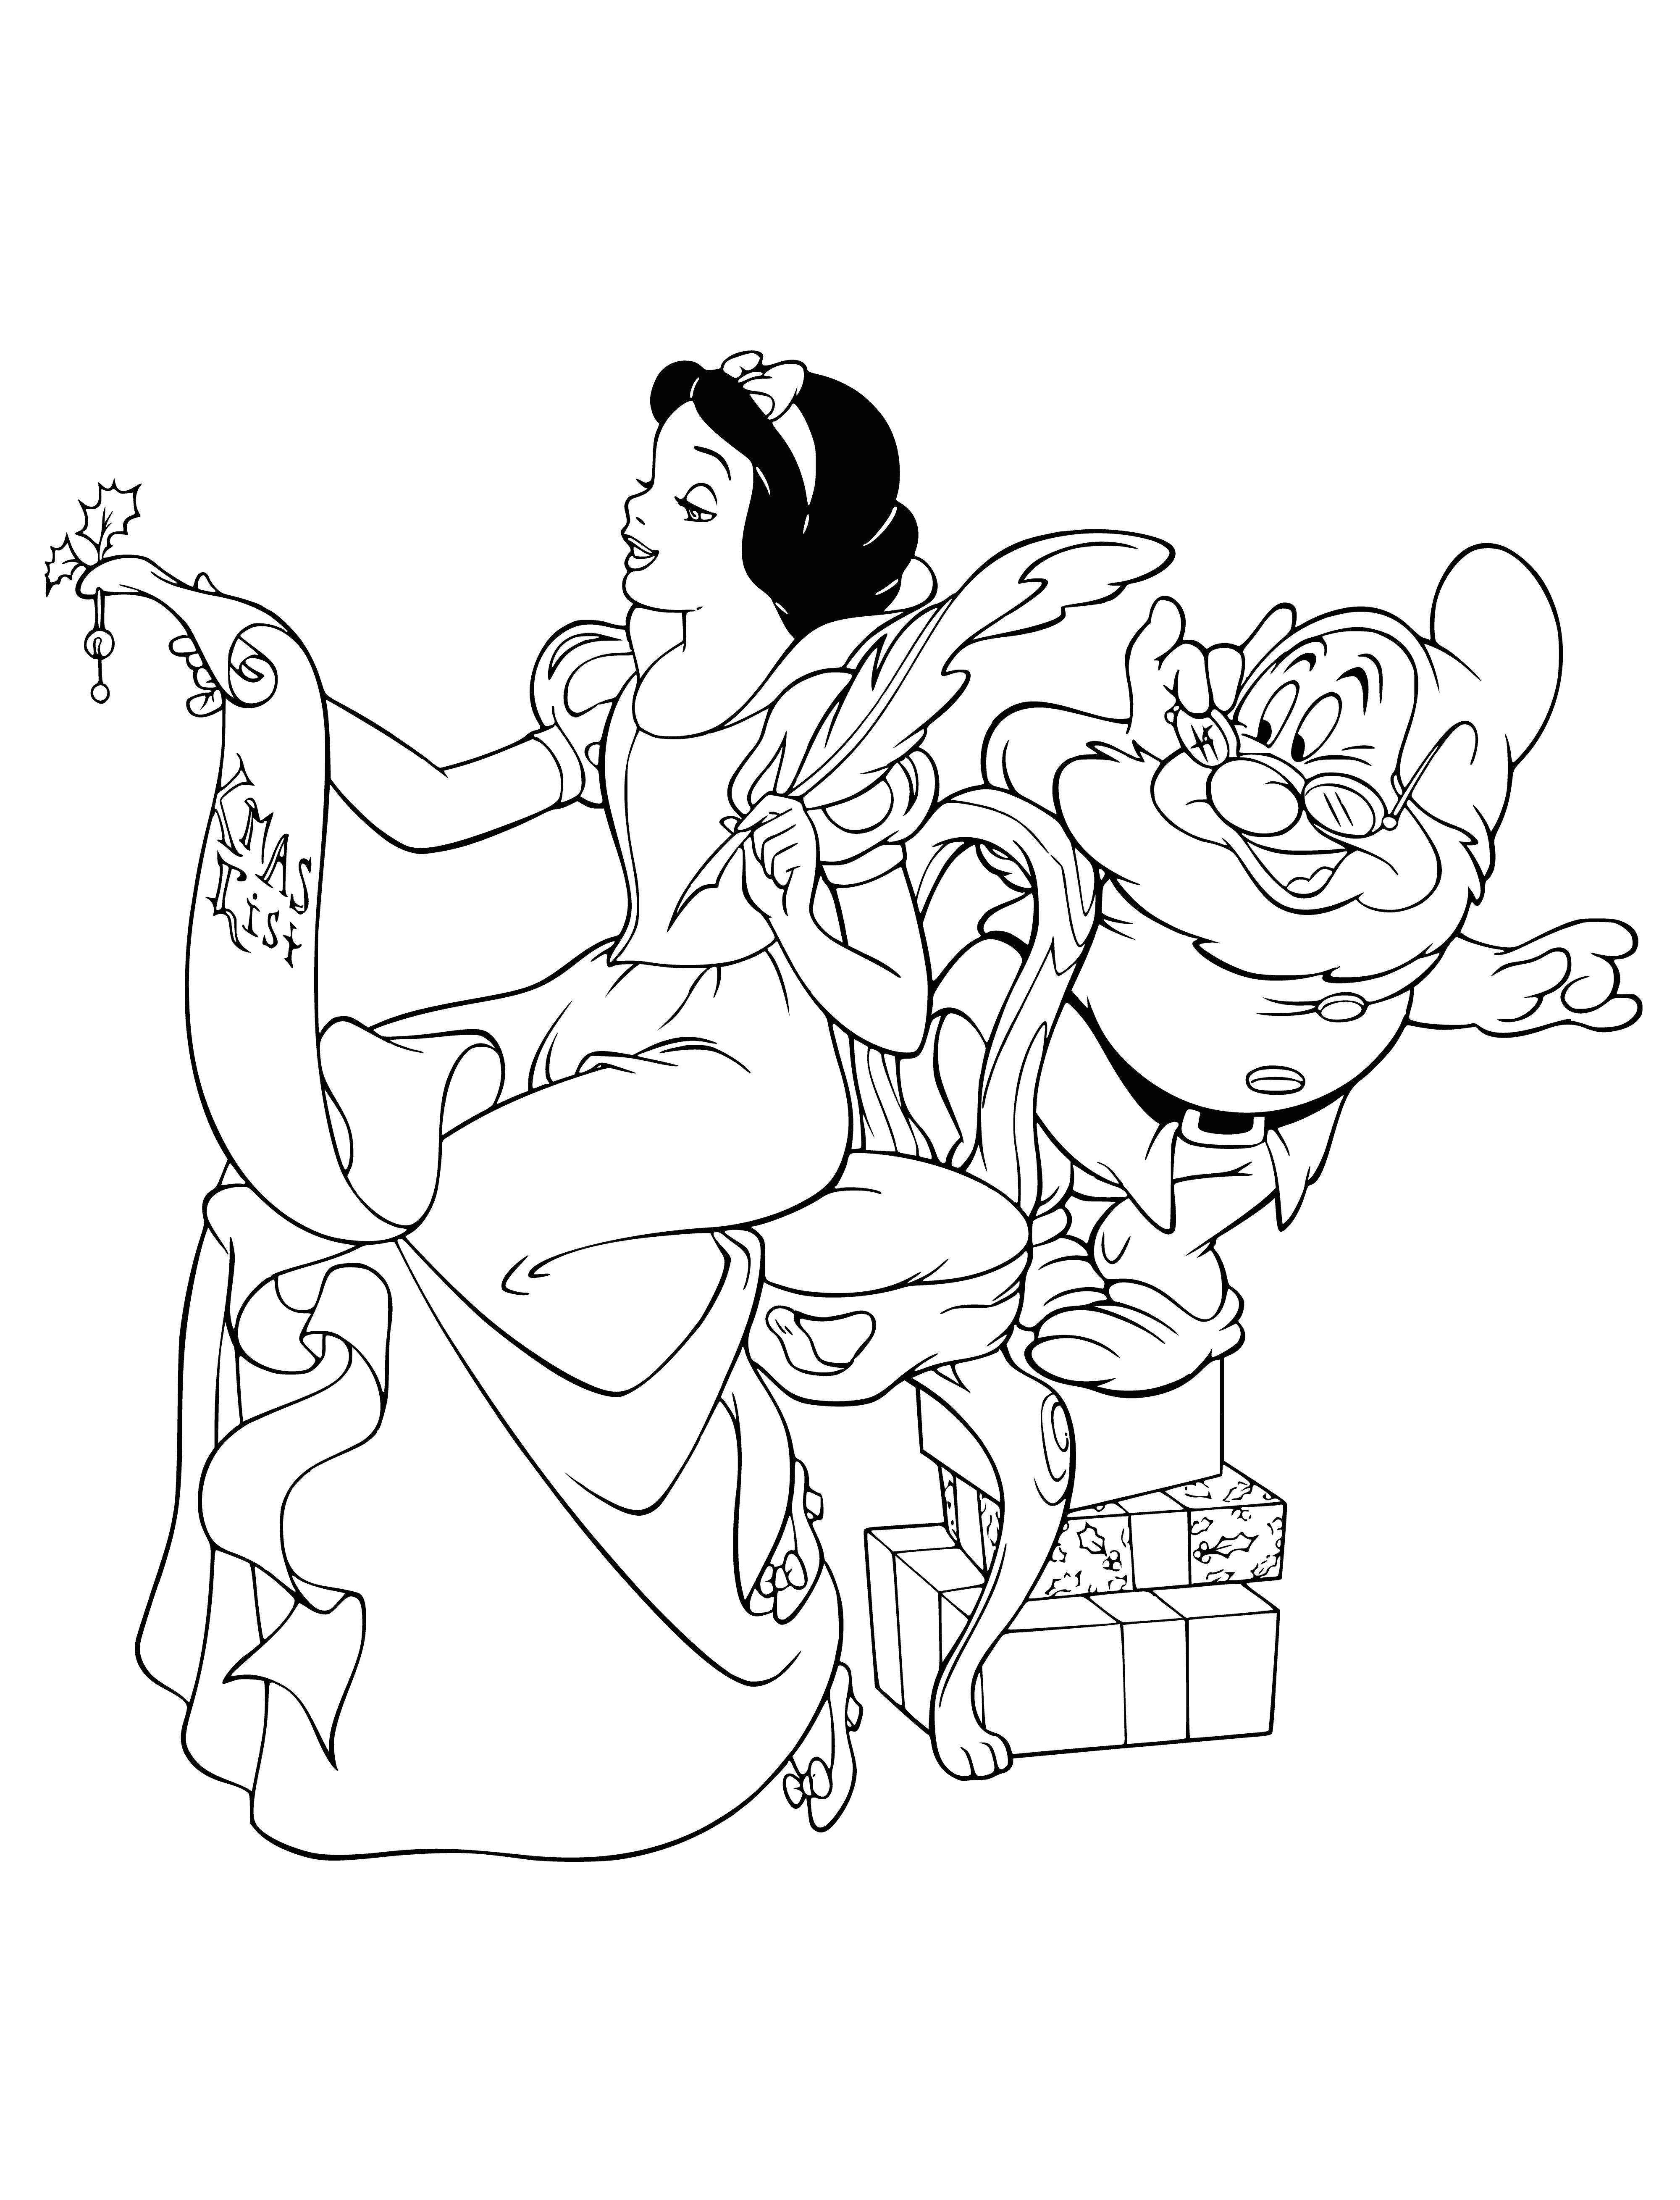 Snow White prepares New Year's gifts coloring page